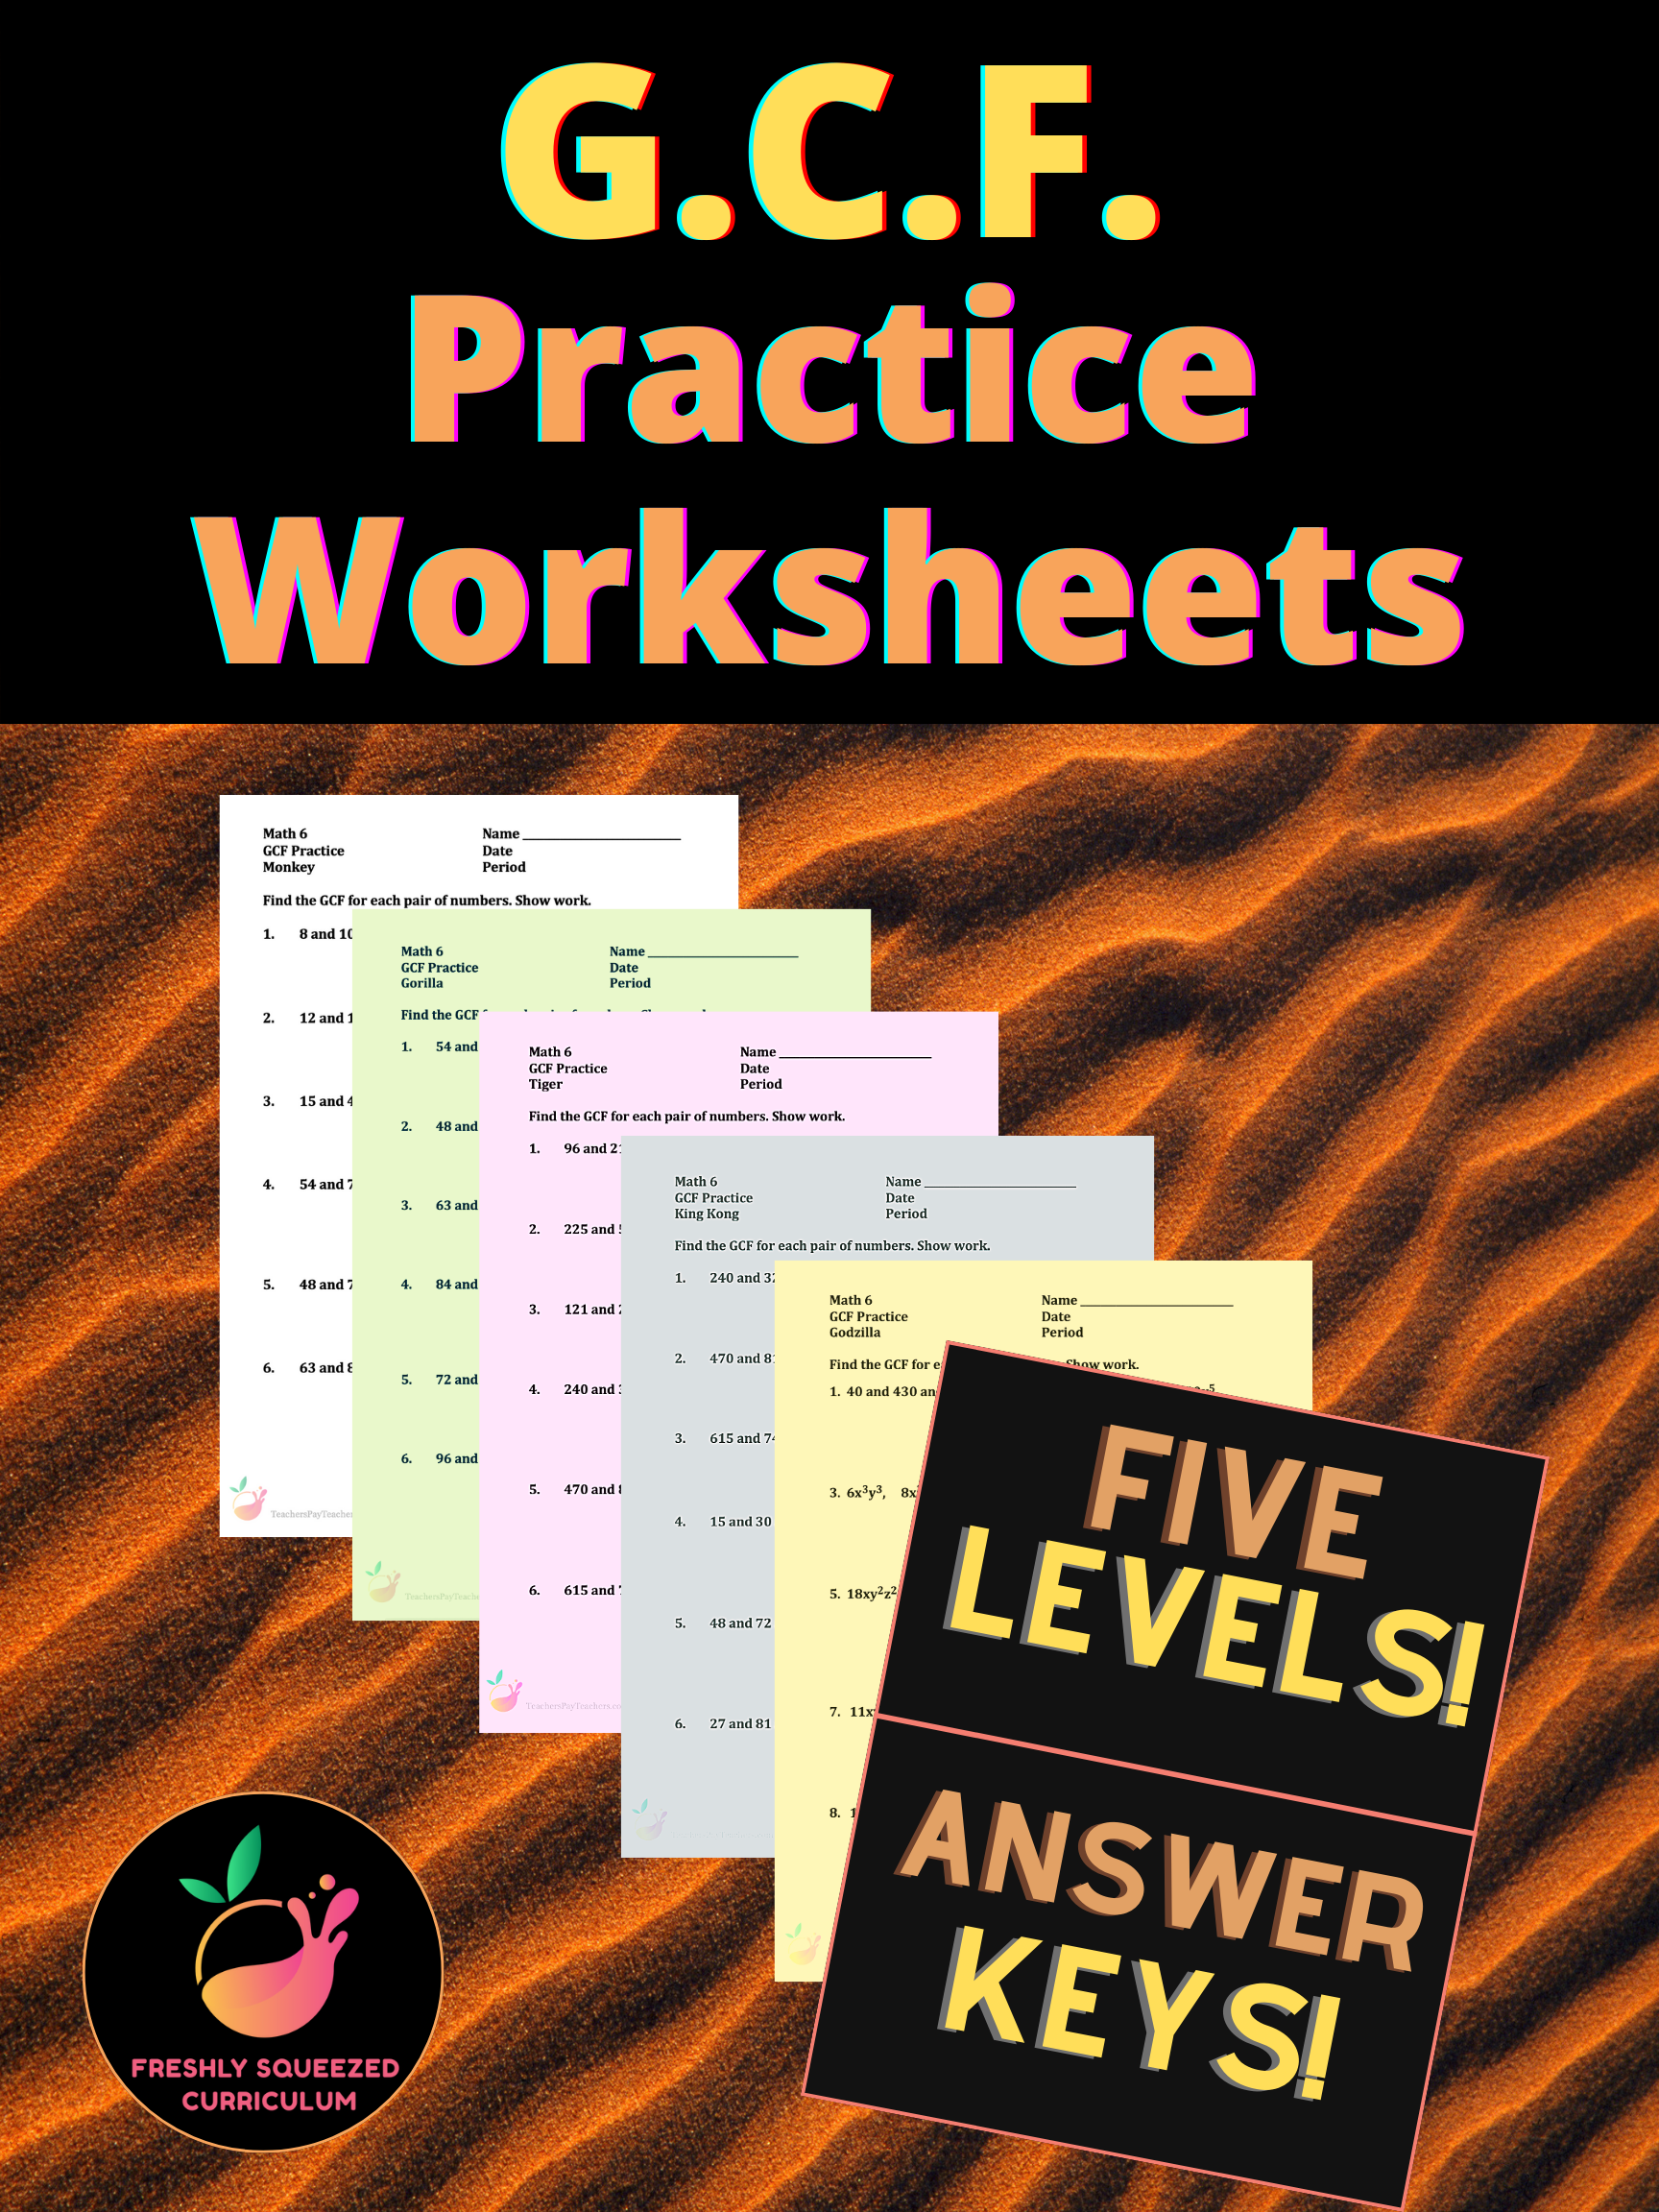 Greatest Common Factor (G.C.F.) Practice Worksheets (5 LEVELS!!)